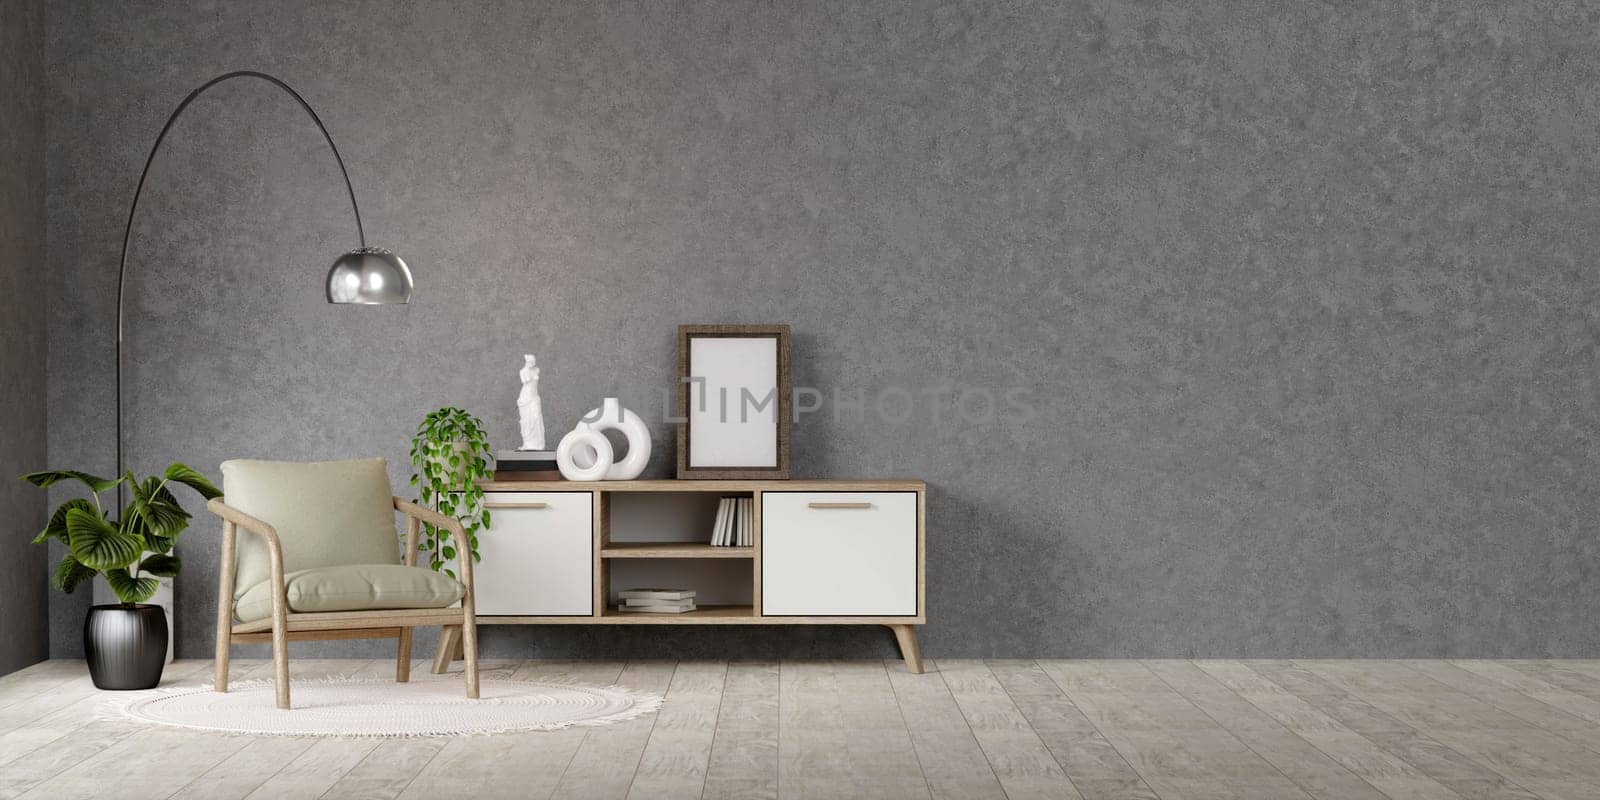 Wooden rustic cabinet near wall with blank poster frame with copy space. Interior design of modern living room. 3D render illustration by meepiangraphic